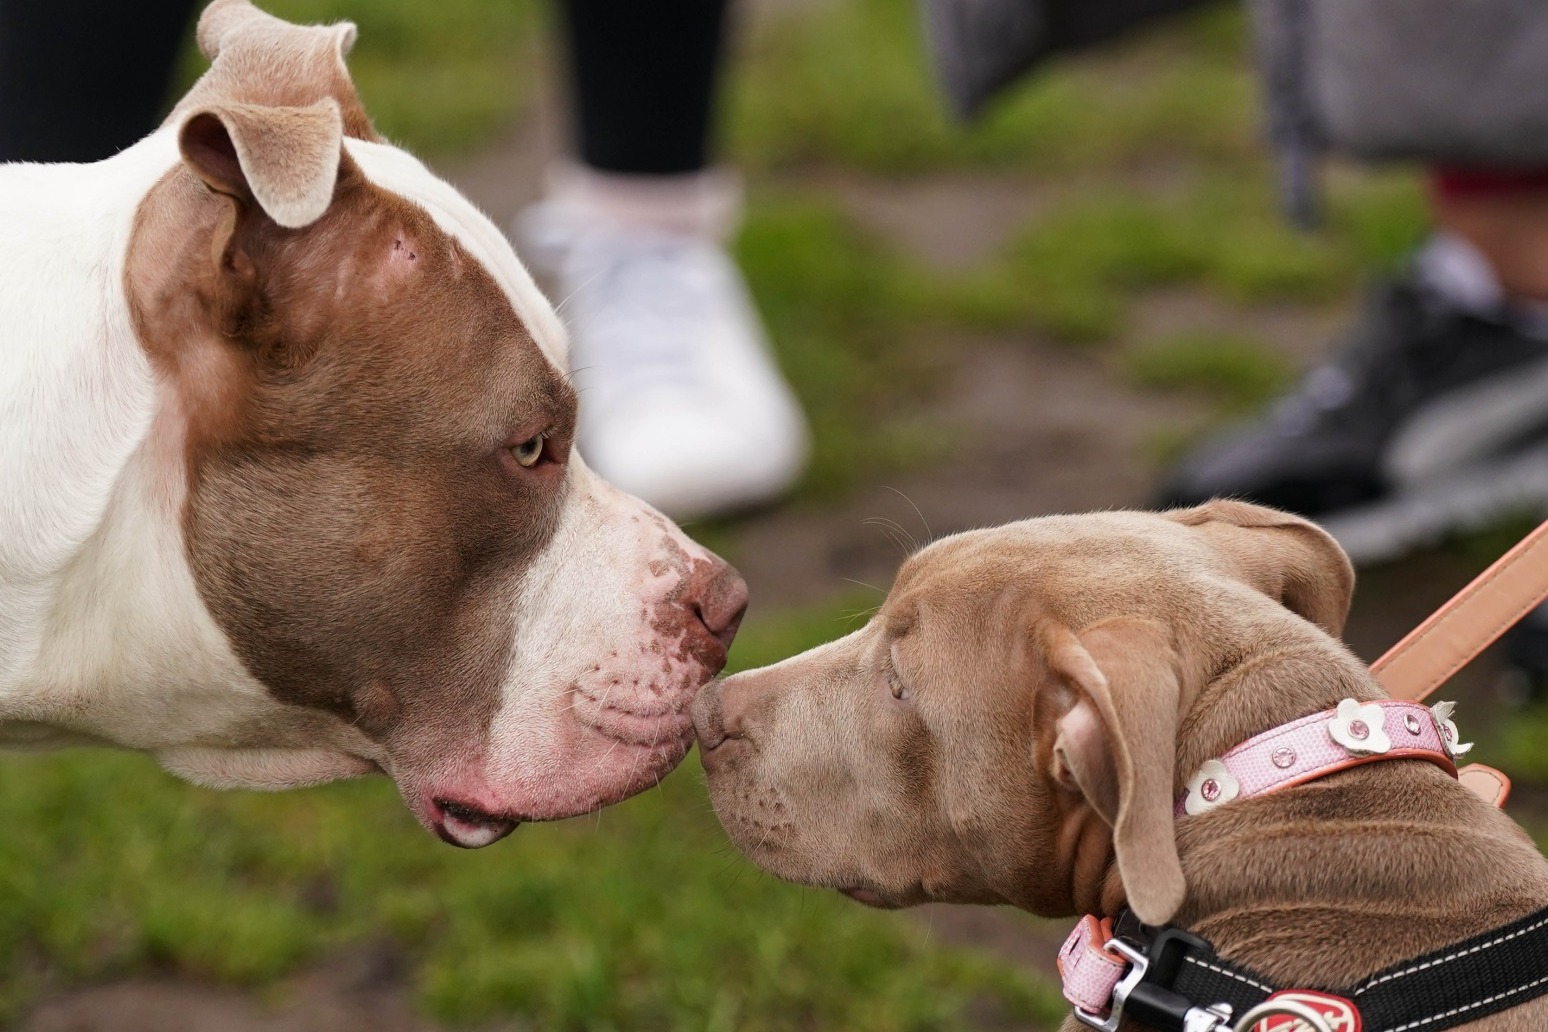 XL bully owners have two weeks to ensure dog is legal 